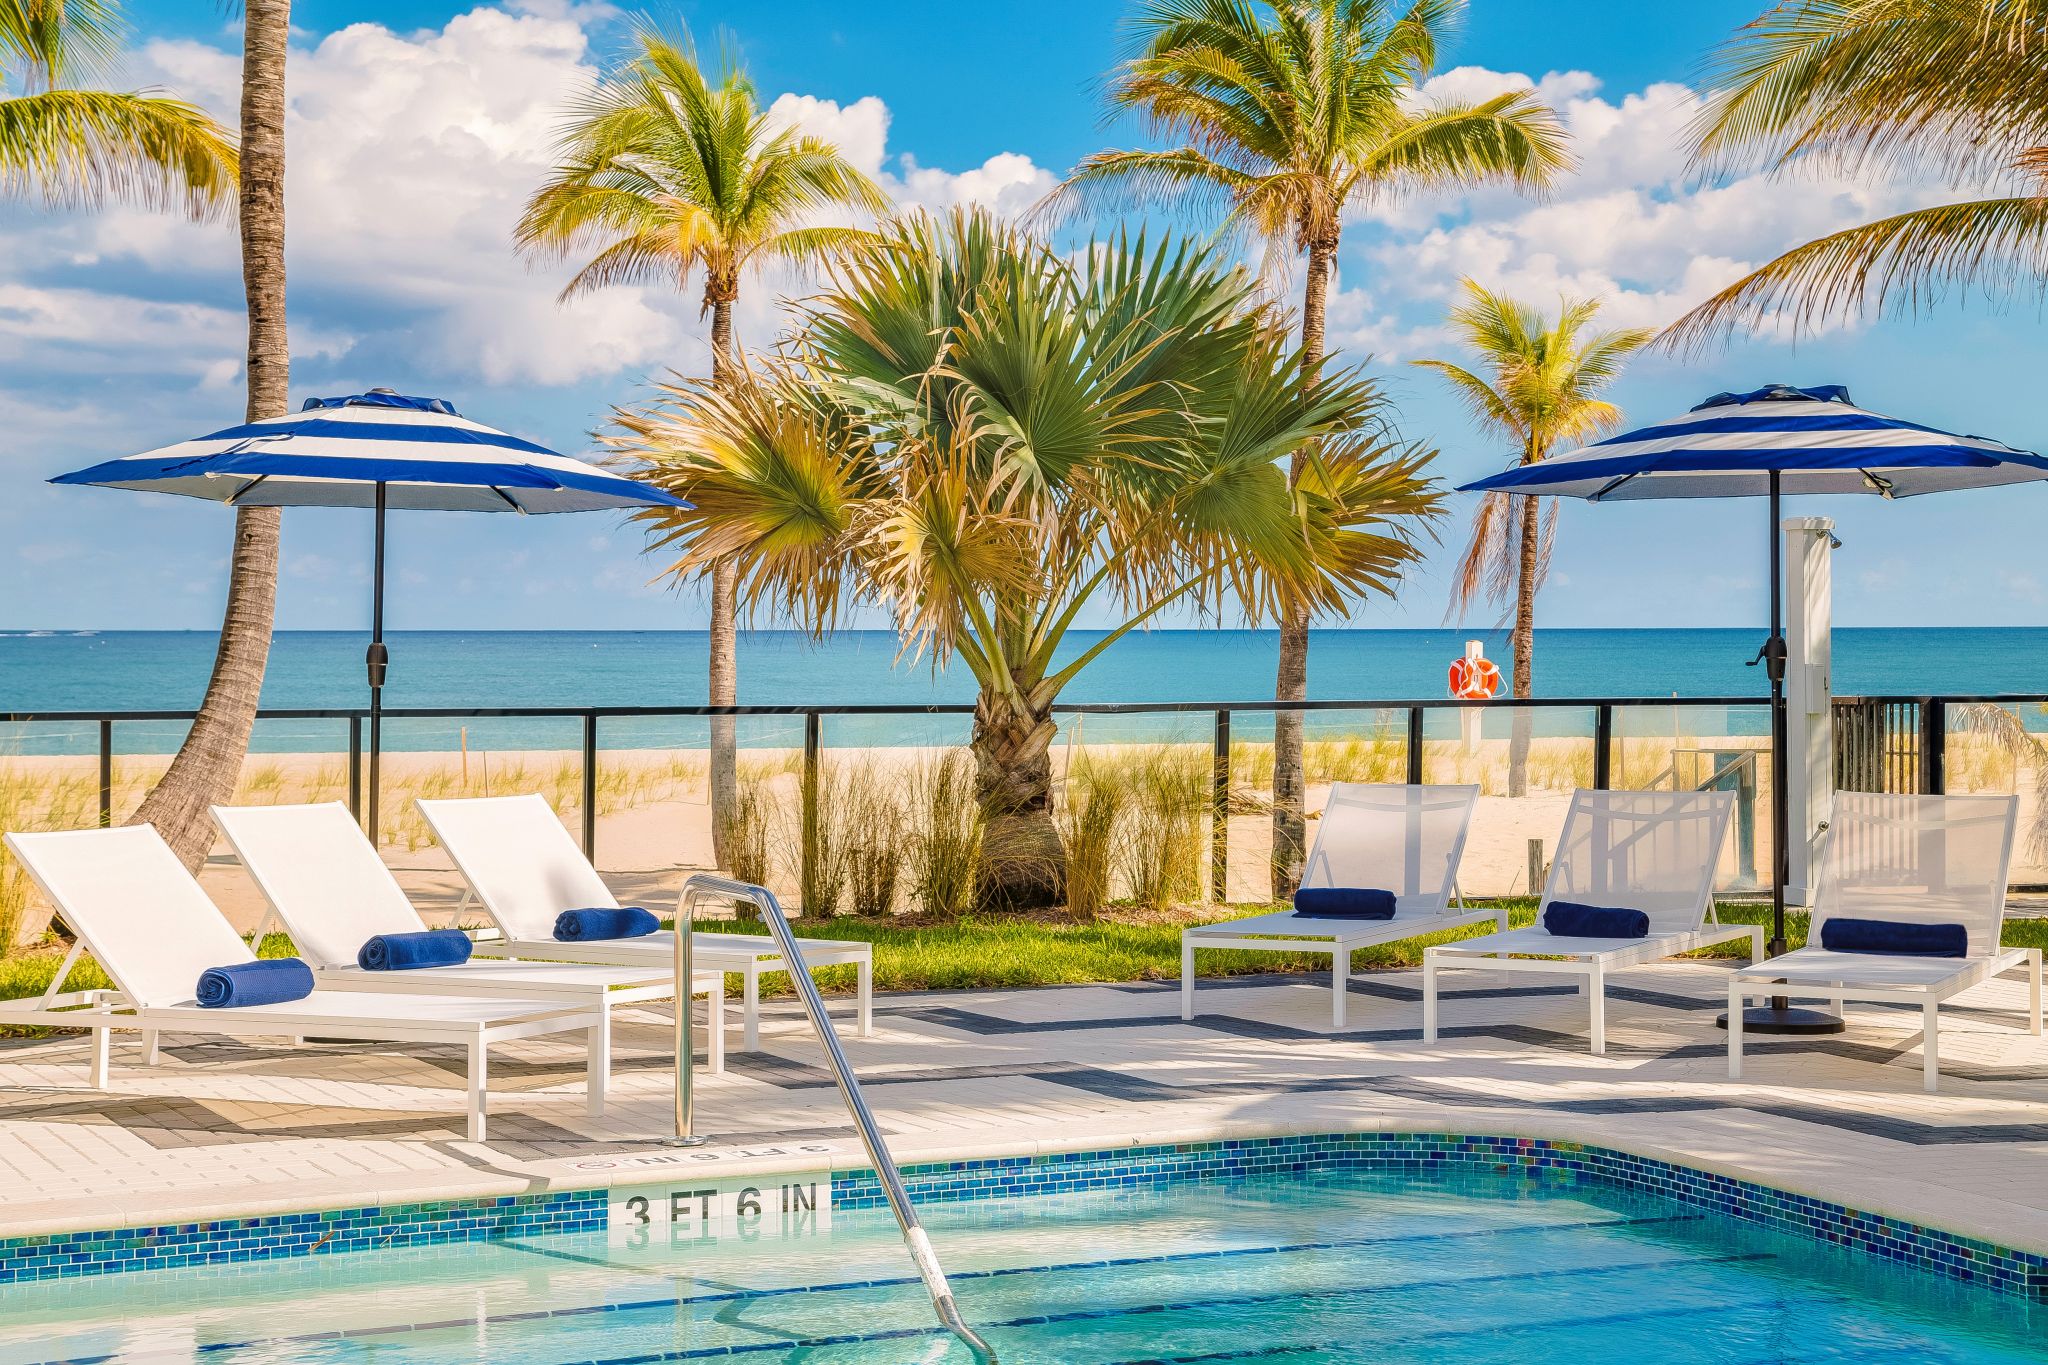 An Affordable Getaway in Florida for Remote Learning and Working